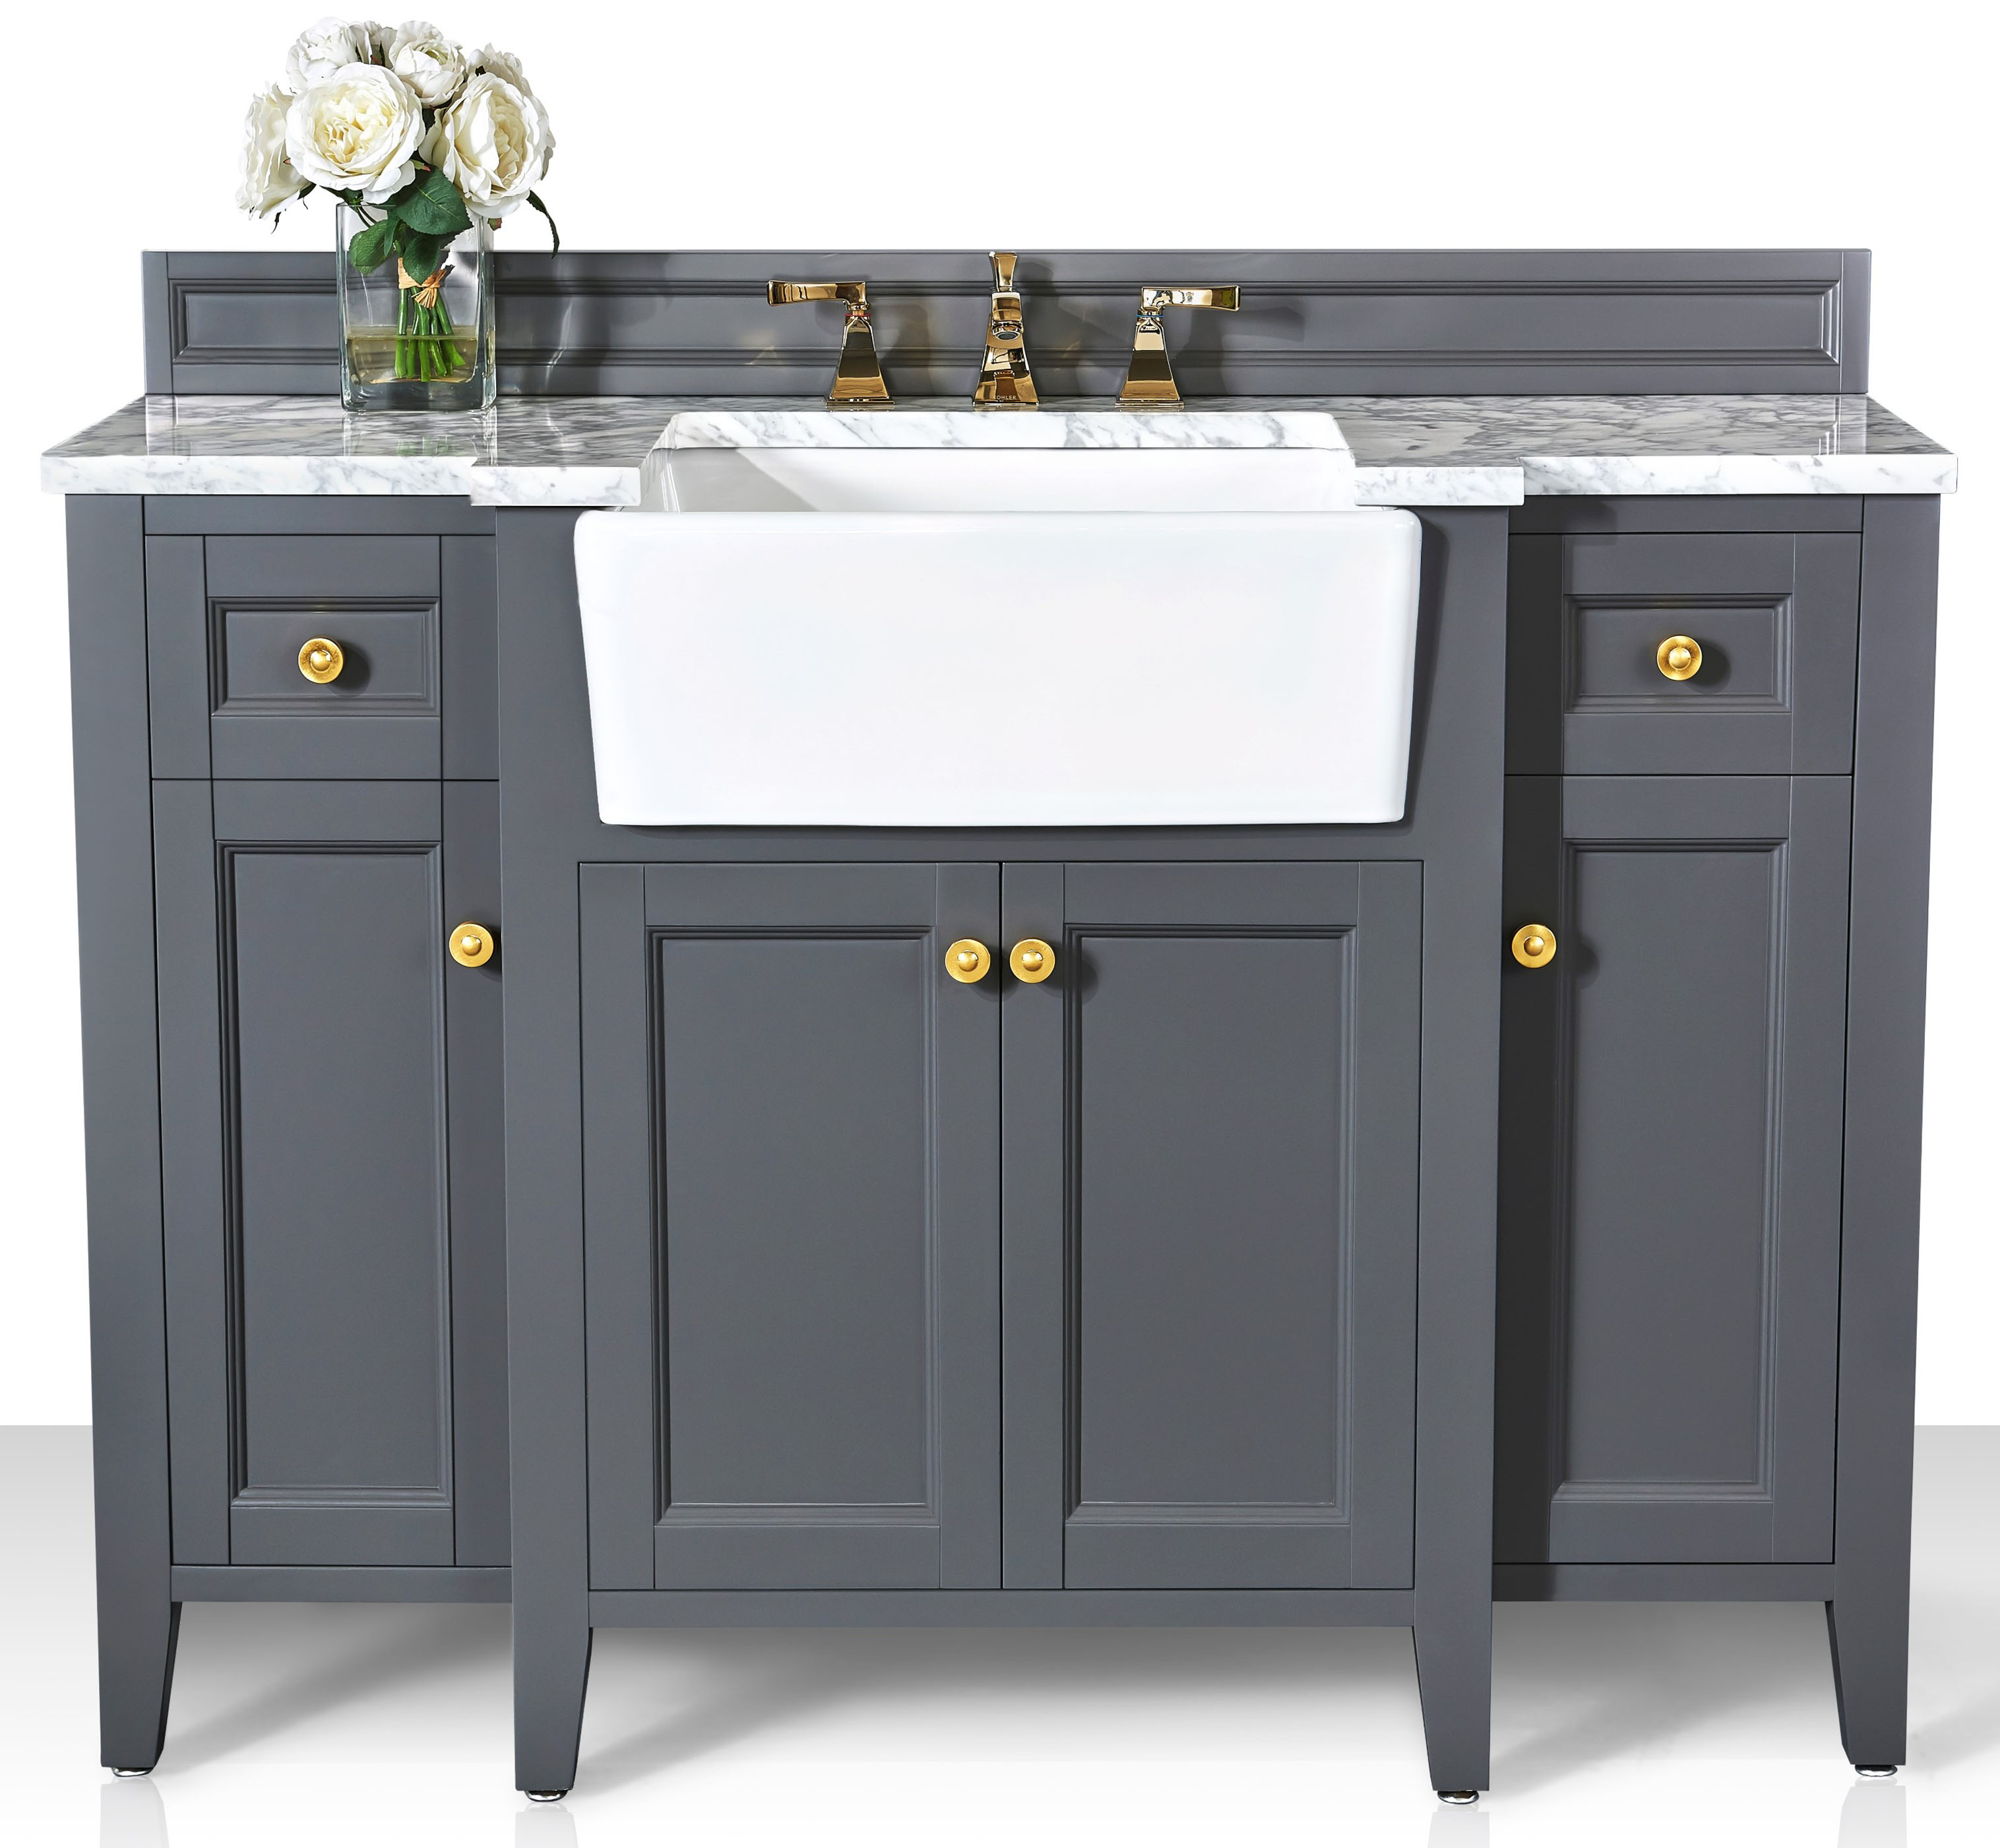 48" Bath Vanity Set in Sapphire Gray with Italian Carrara White Marble Vanity Top and White Undermount Basin with Gold Hardware